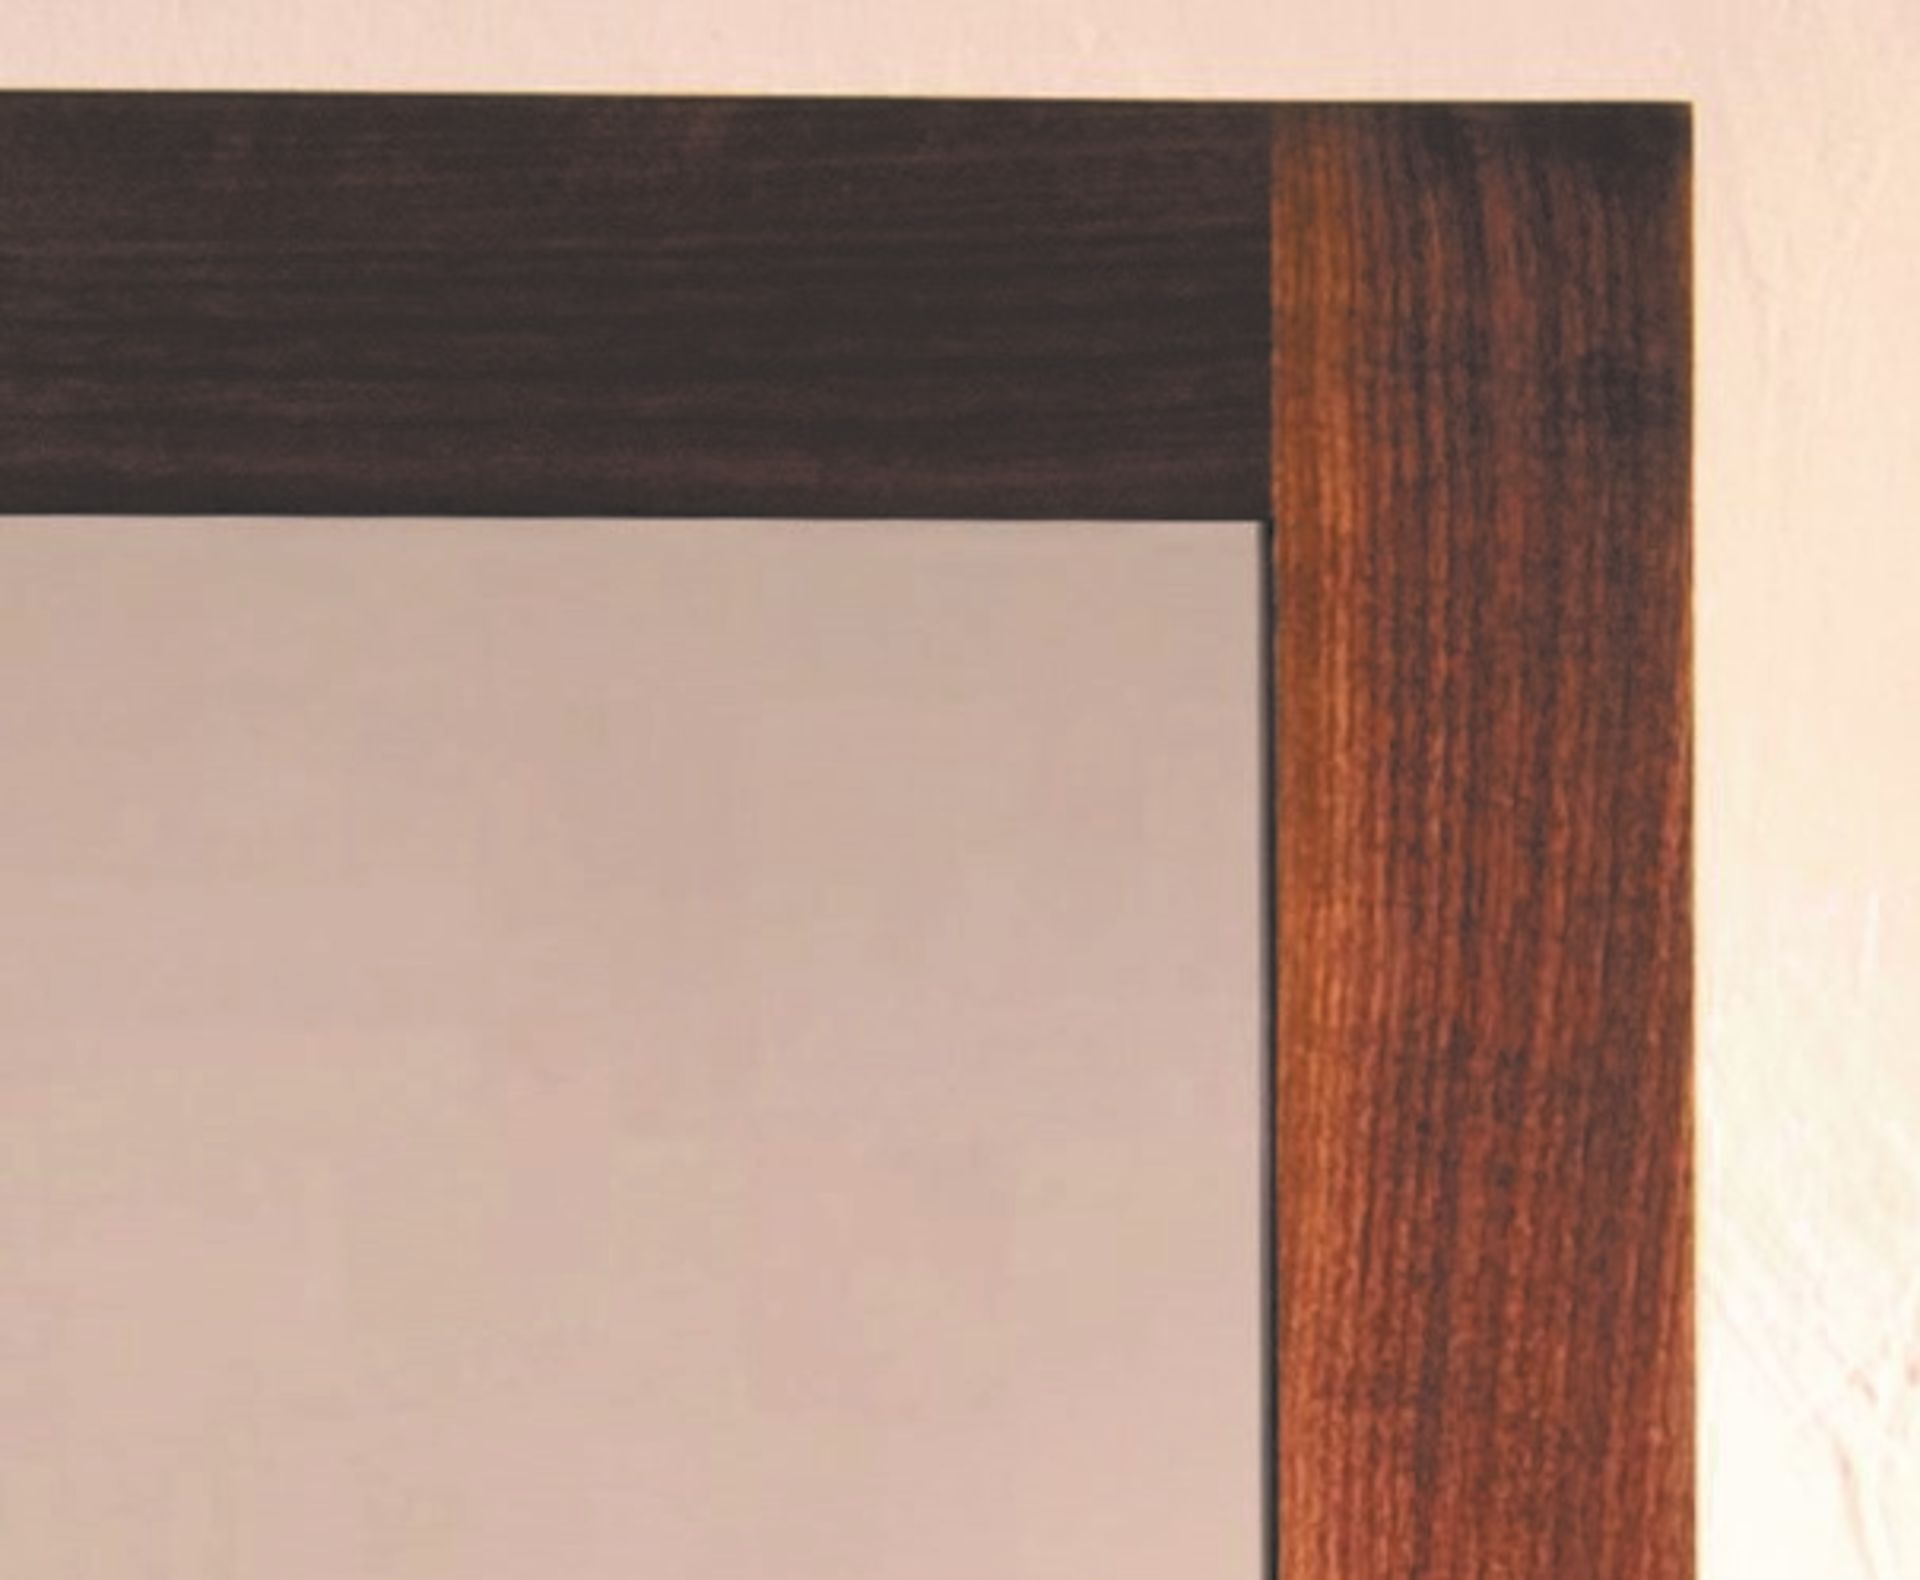 1 x Stonearth Bathroom Wall Mirror - American Solid Walnut Frame With Bevelled Glass - Size: Medium - Image 3 of 9